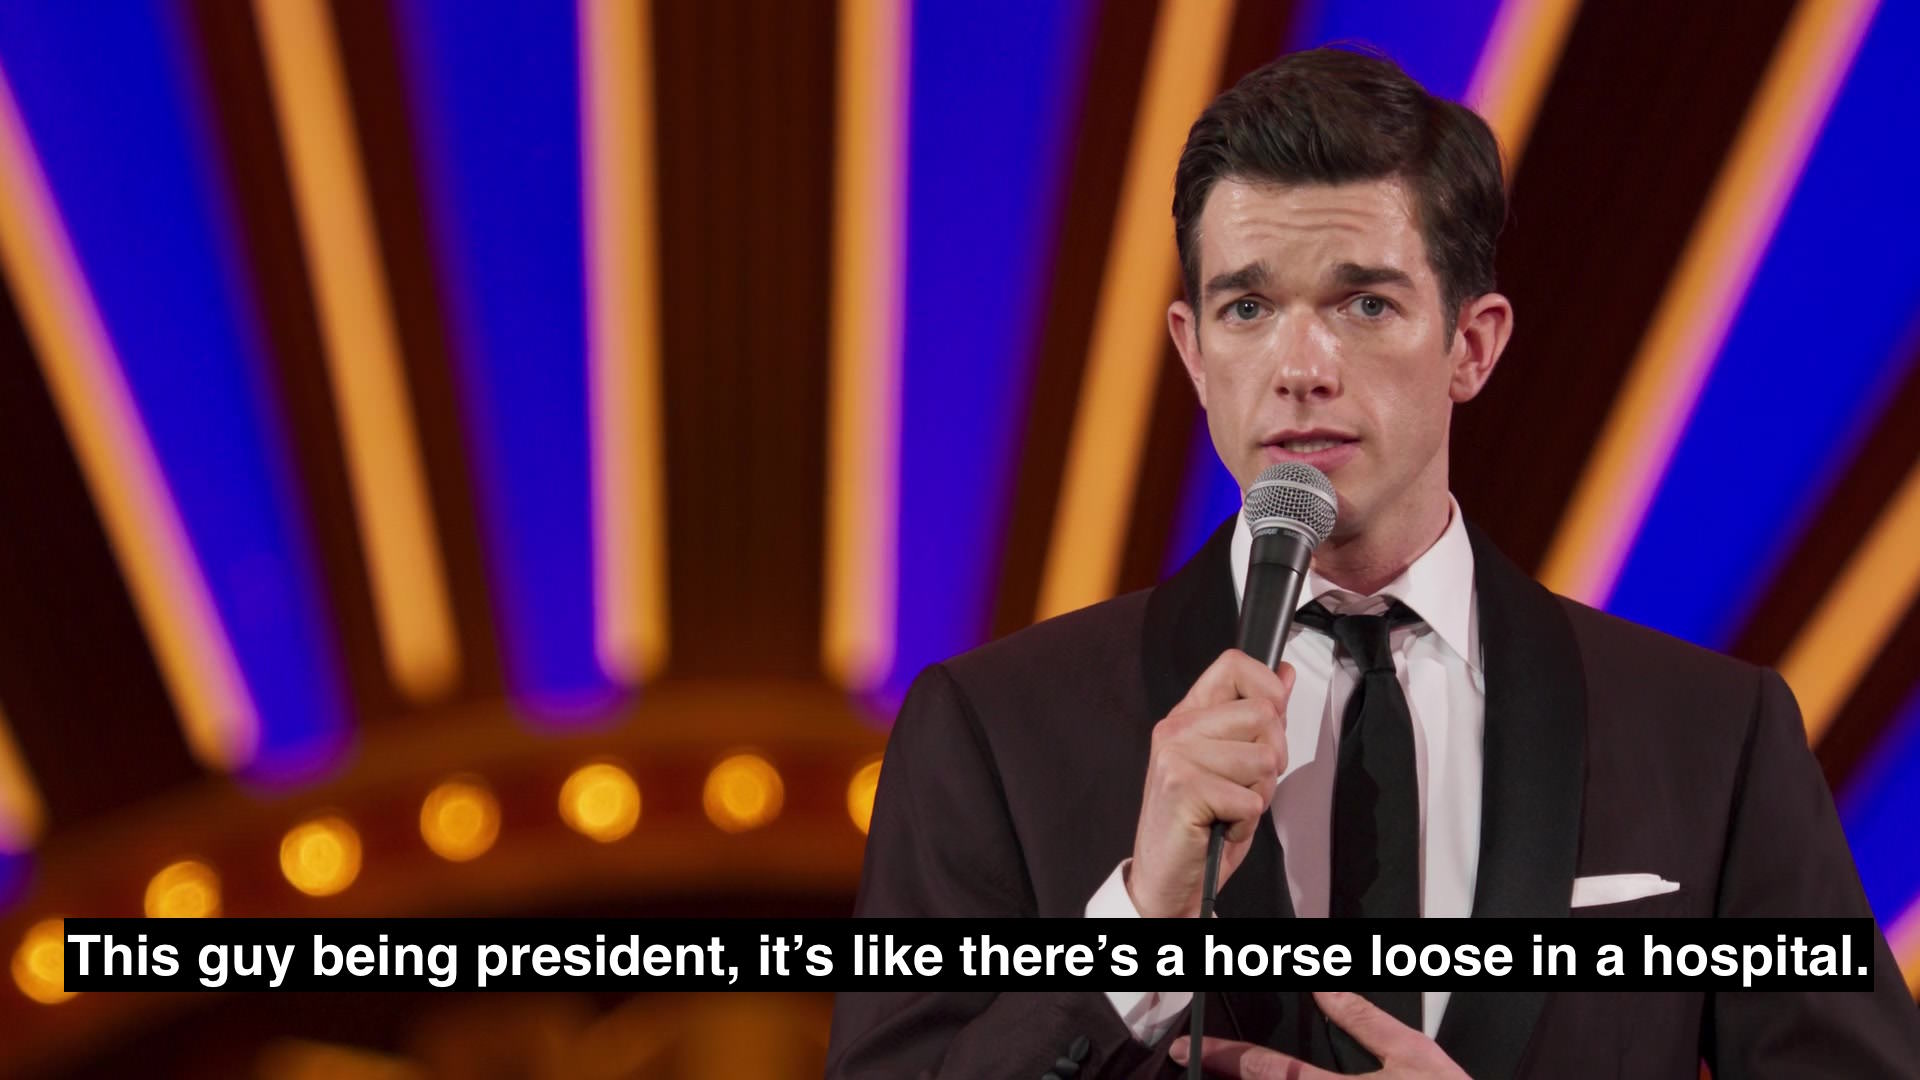 John Mulaney talking about Trump in his Netflix special Kid Gorgeous. 